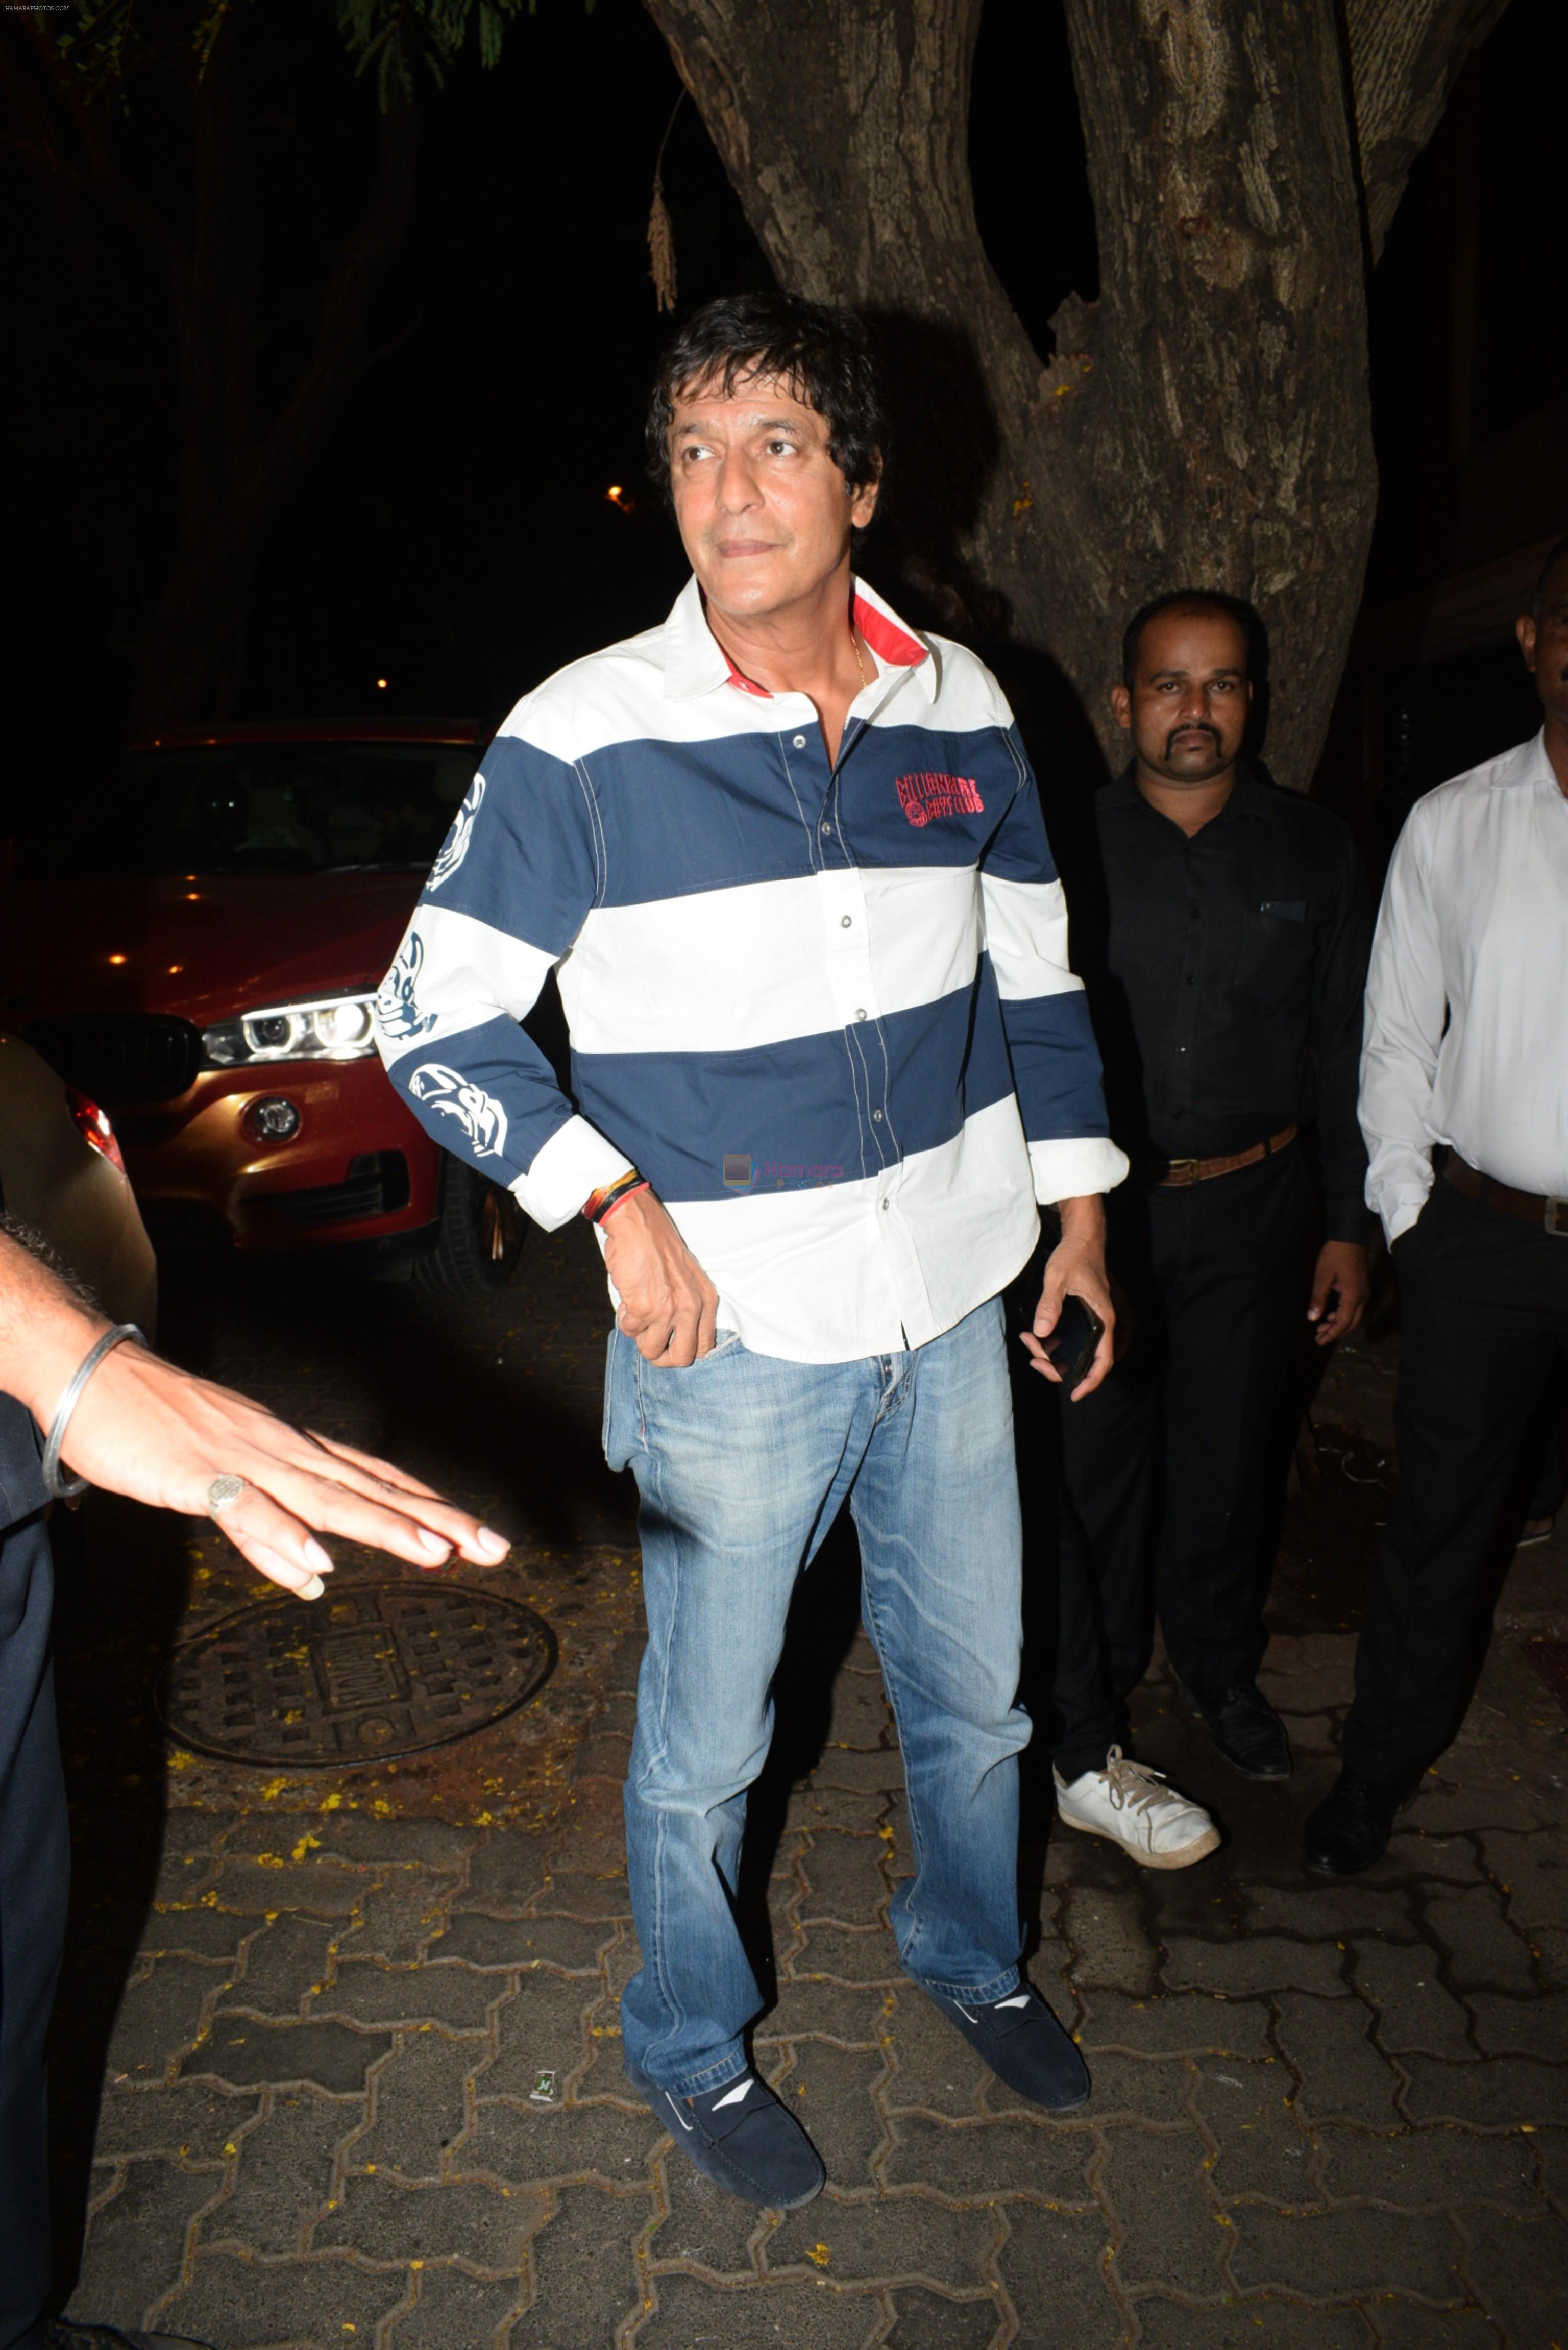 Chunky Pandey at Ekta Kapoor's birthday party at her residence in juhu on 9th June 2019